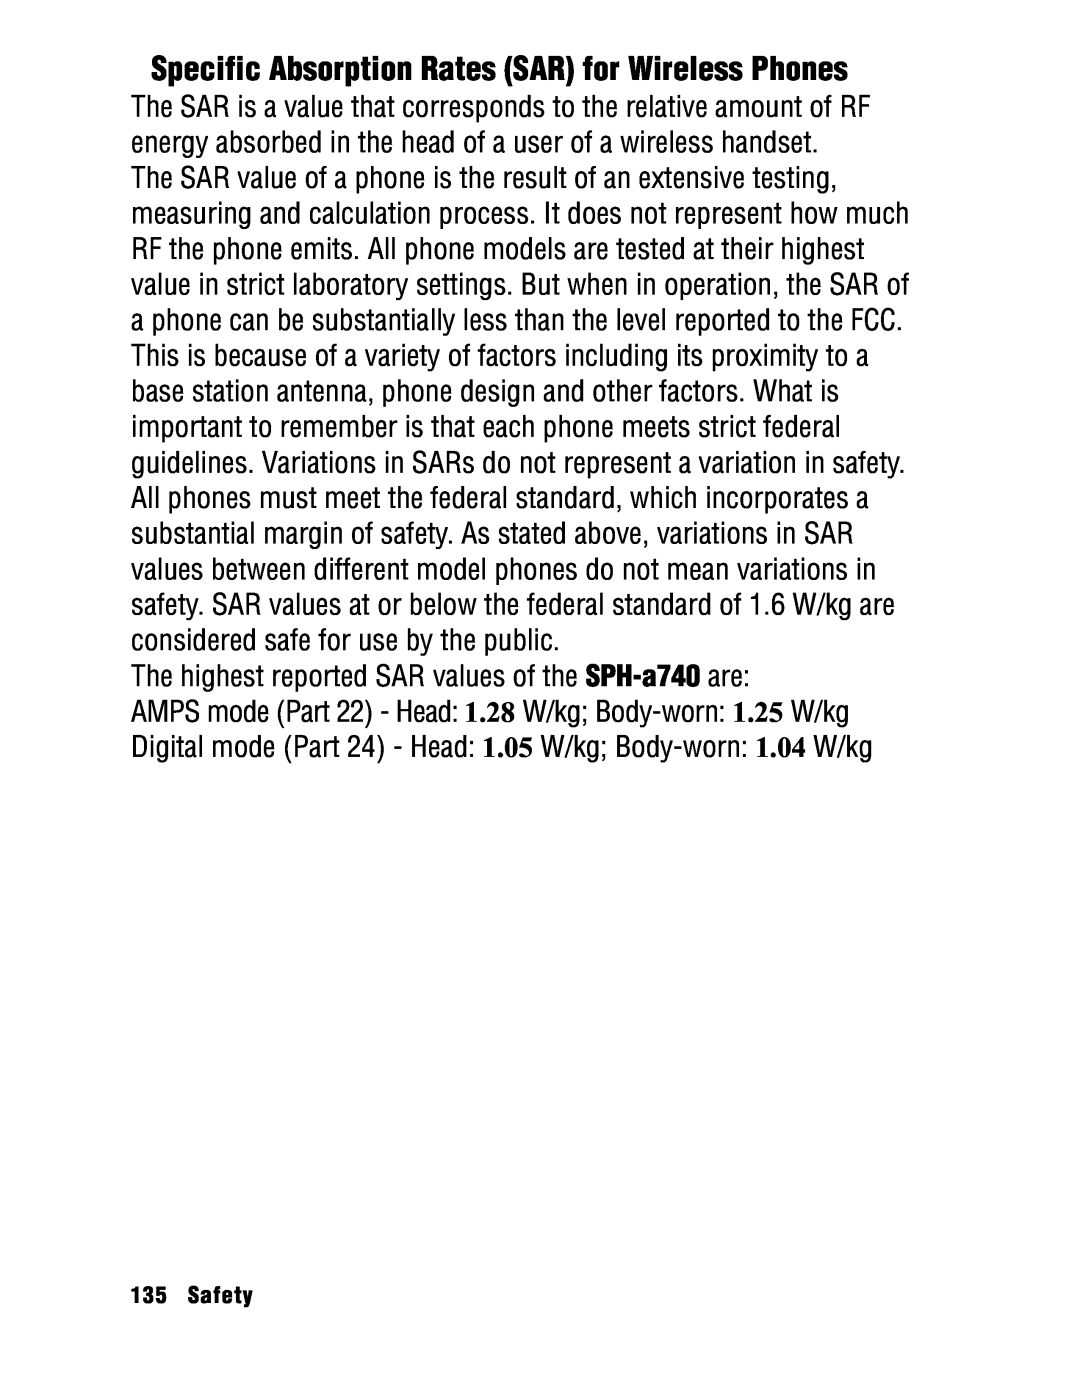 Samsung manual Specific Absorption Rates SAR for Wireless Phones, The highest reported SAR values of the SPH-a740 are 